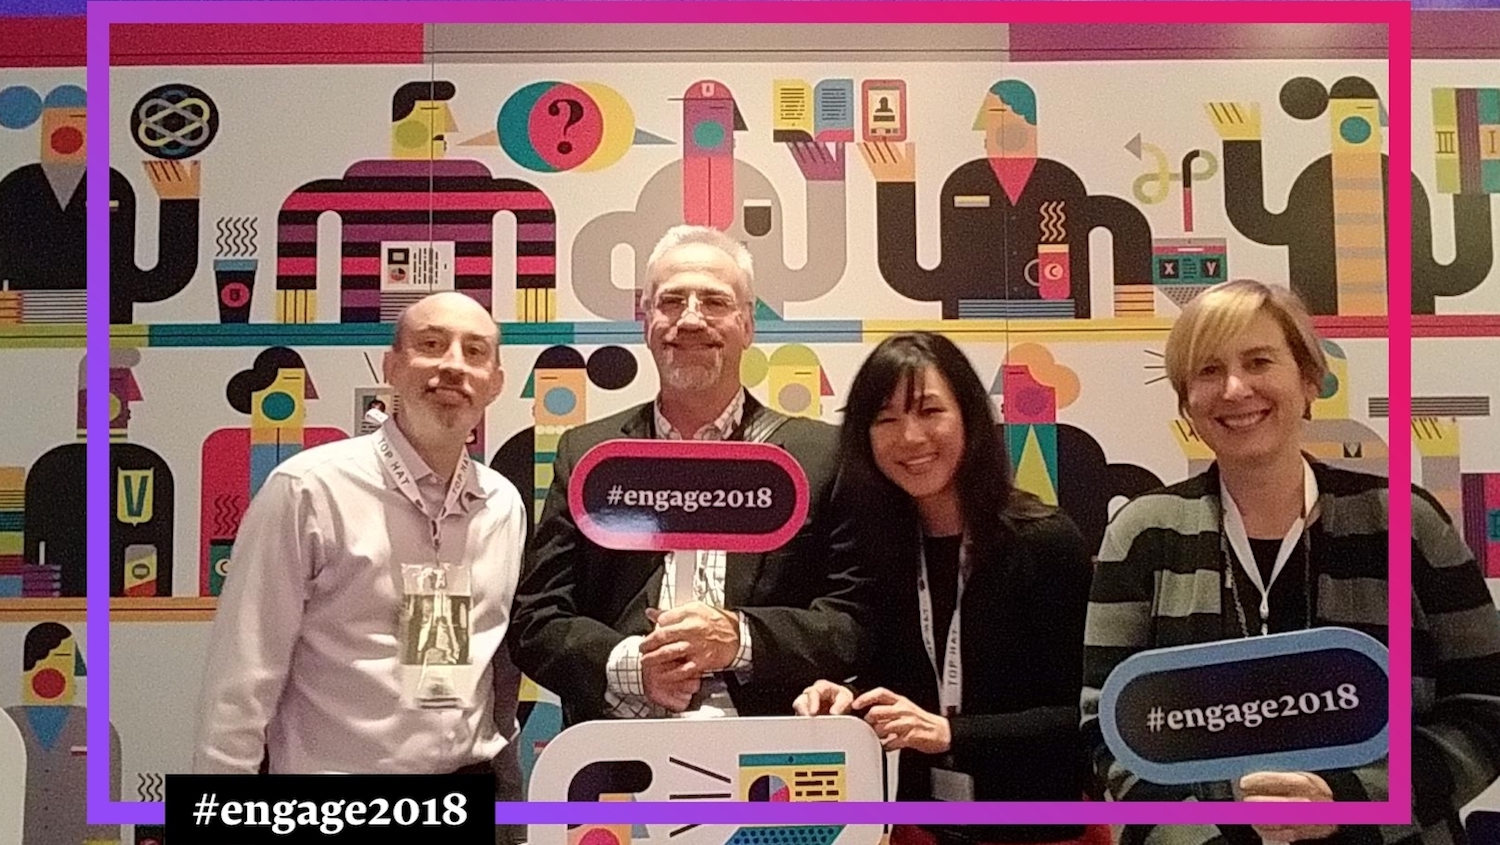 David Howard, Lou Harrison, Yiling Chappelow and Stacy Gant at the Engage 2018 conference. The team is holding props in front of a photo booth screen.